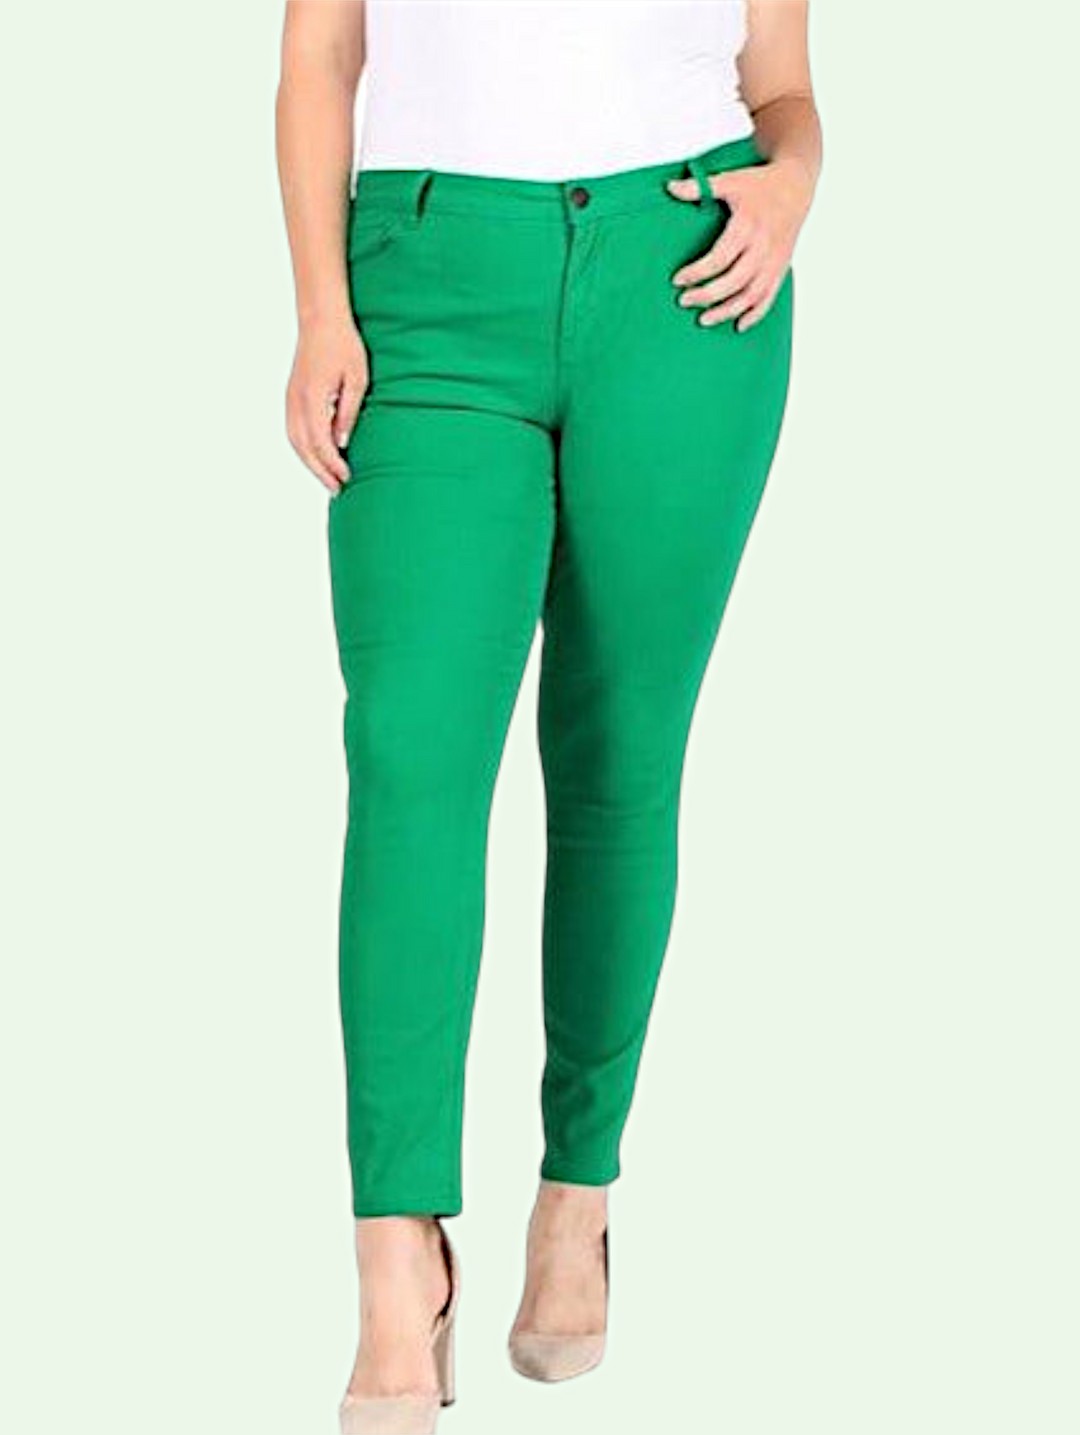 a closer shot of the kelly green stretch jeans